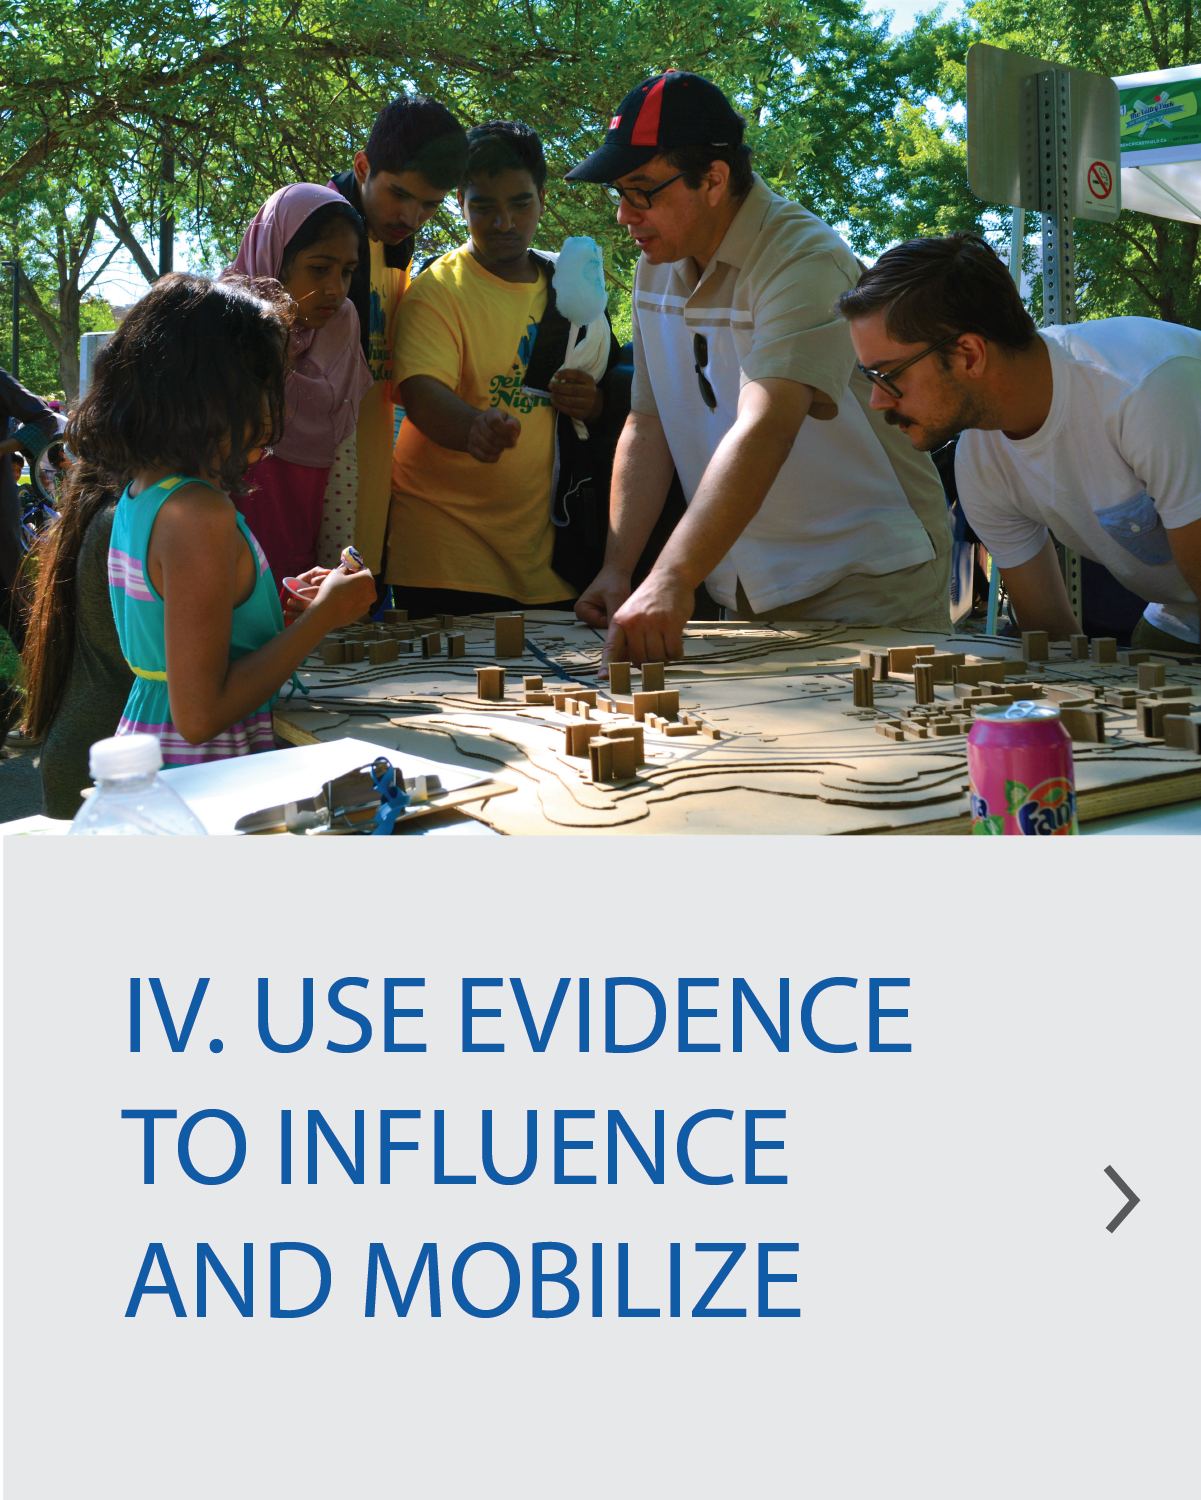 4. Use evidence to influence and mobilize